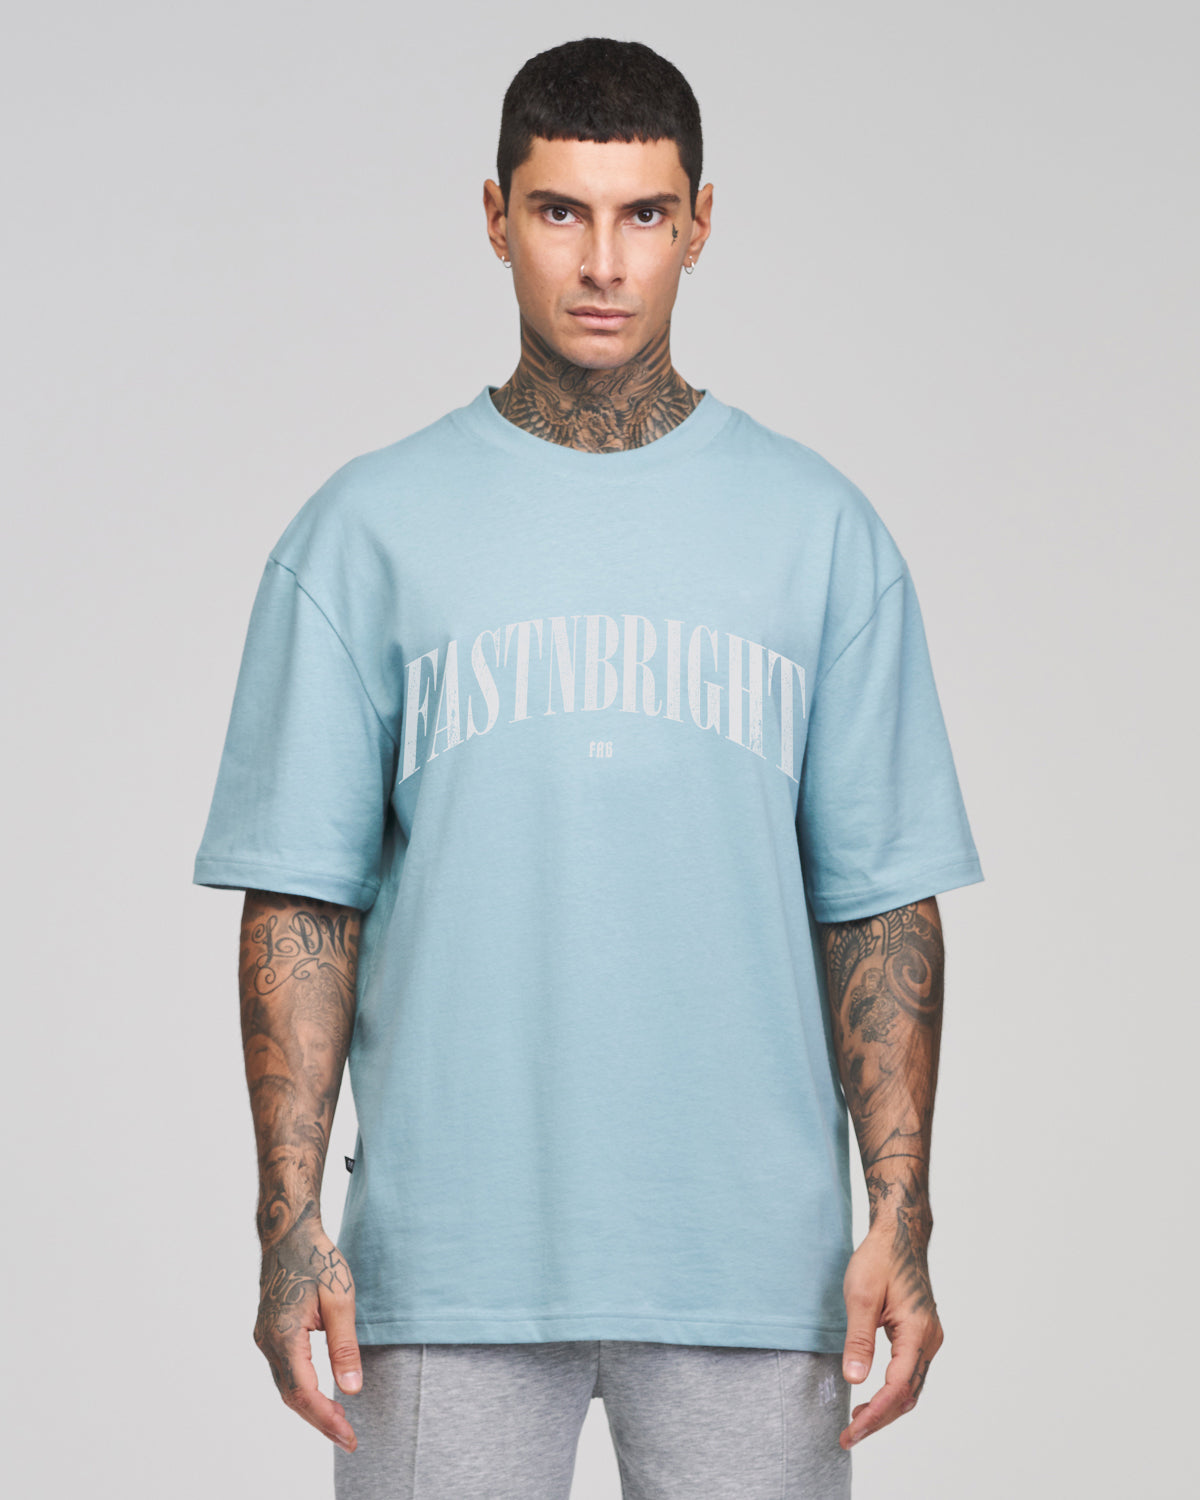 FASTNBRIGHT Tee